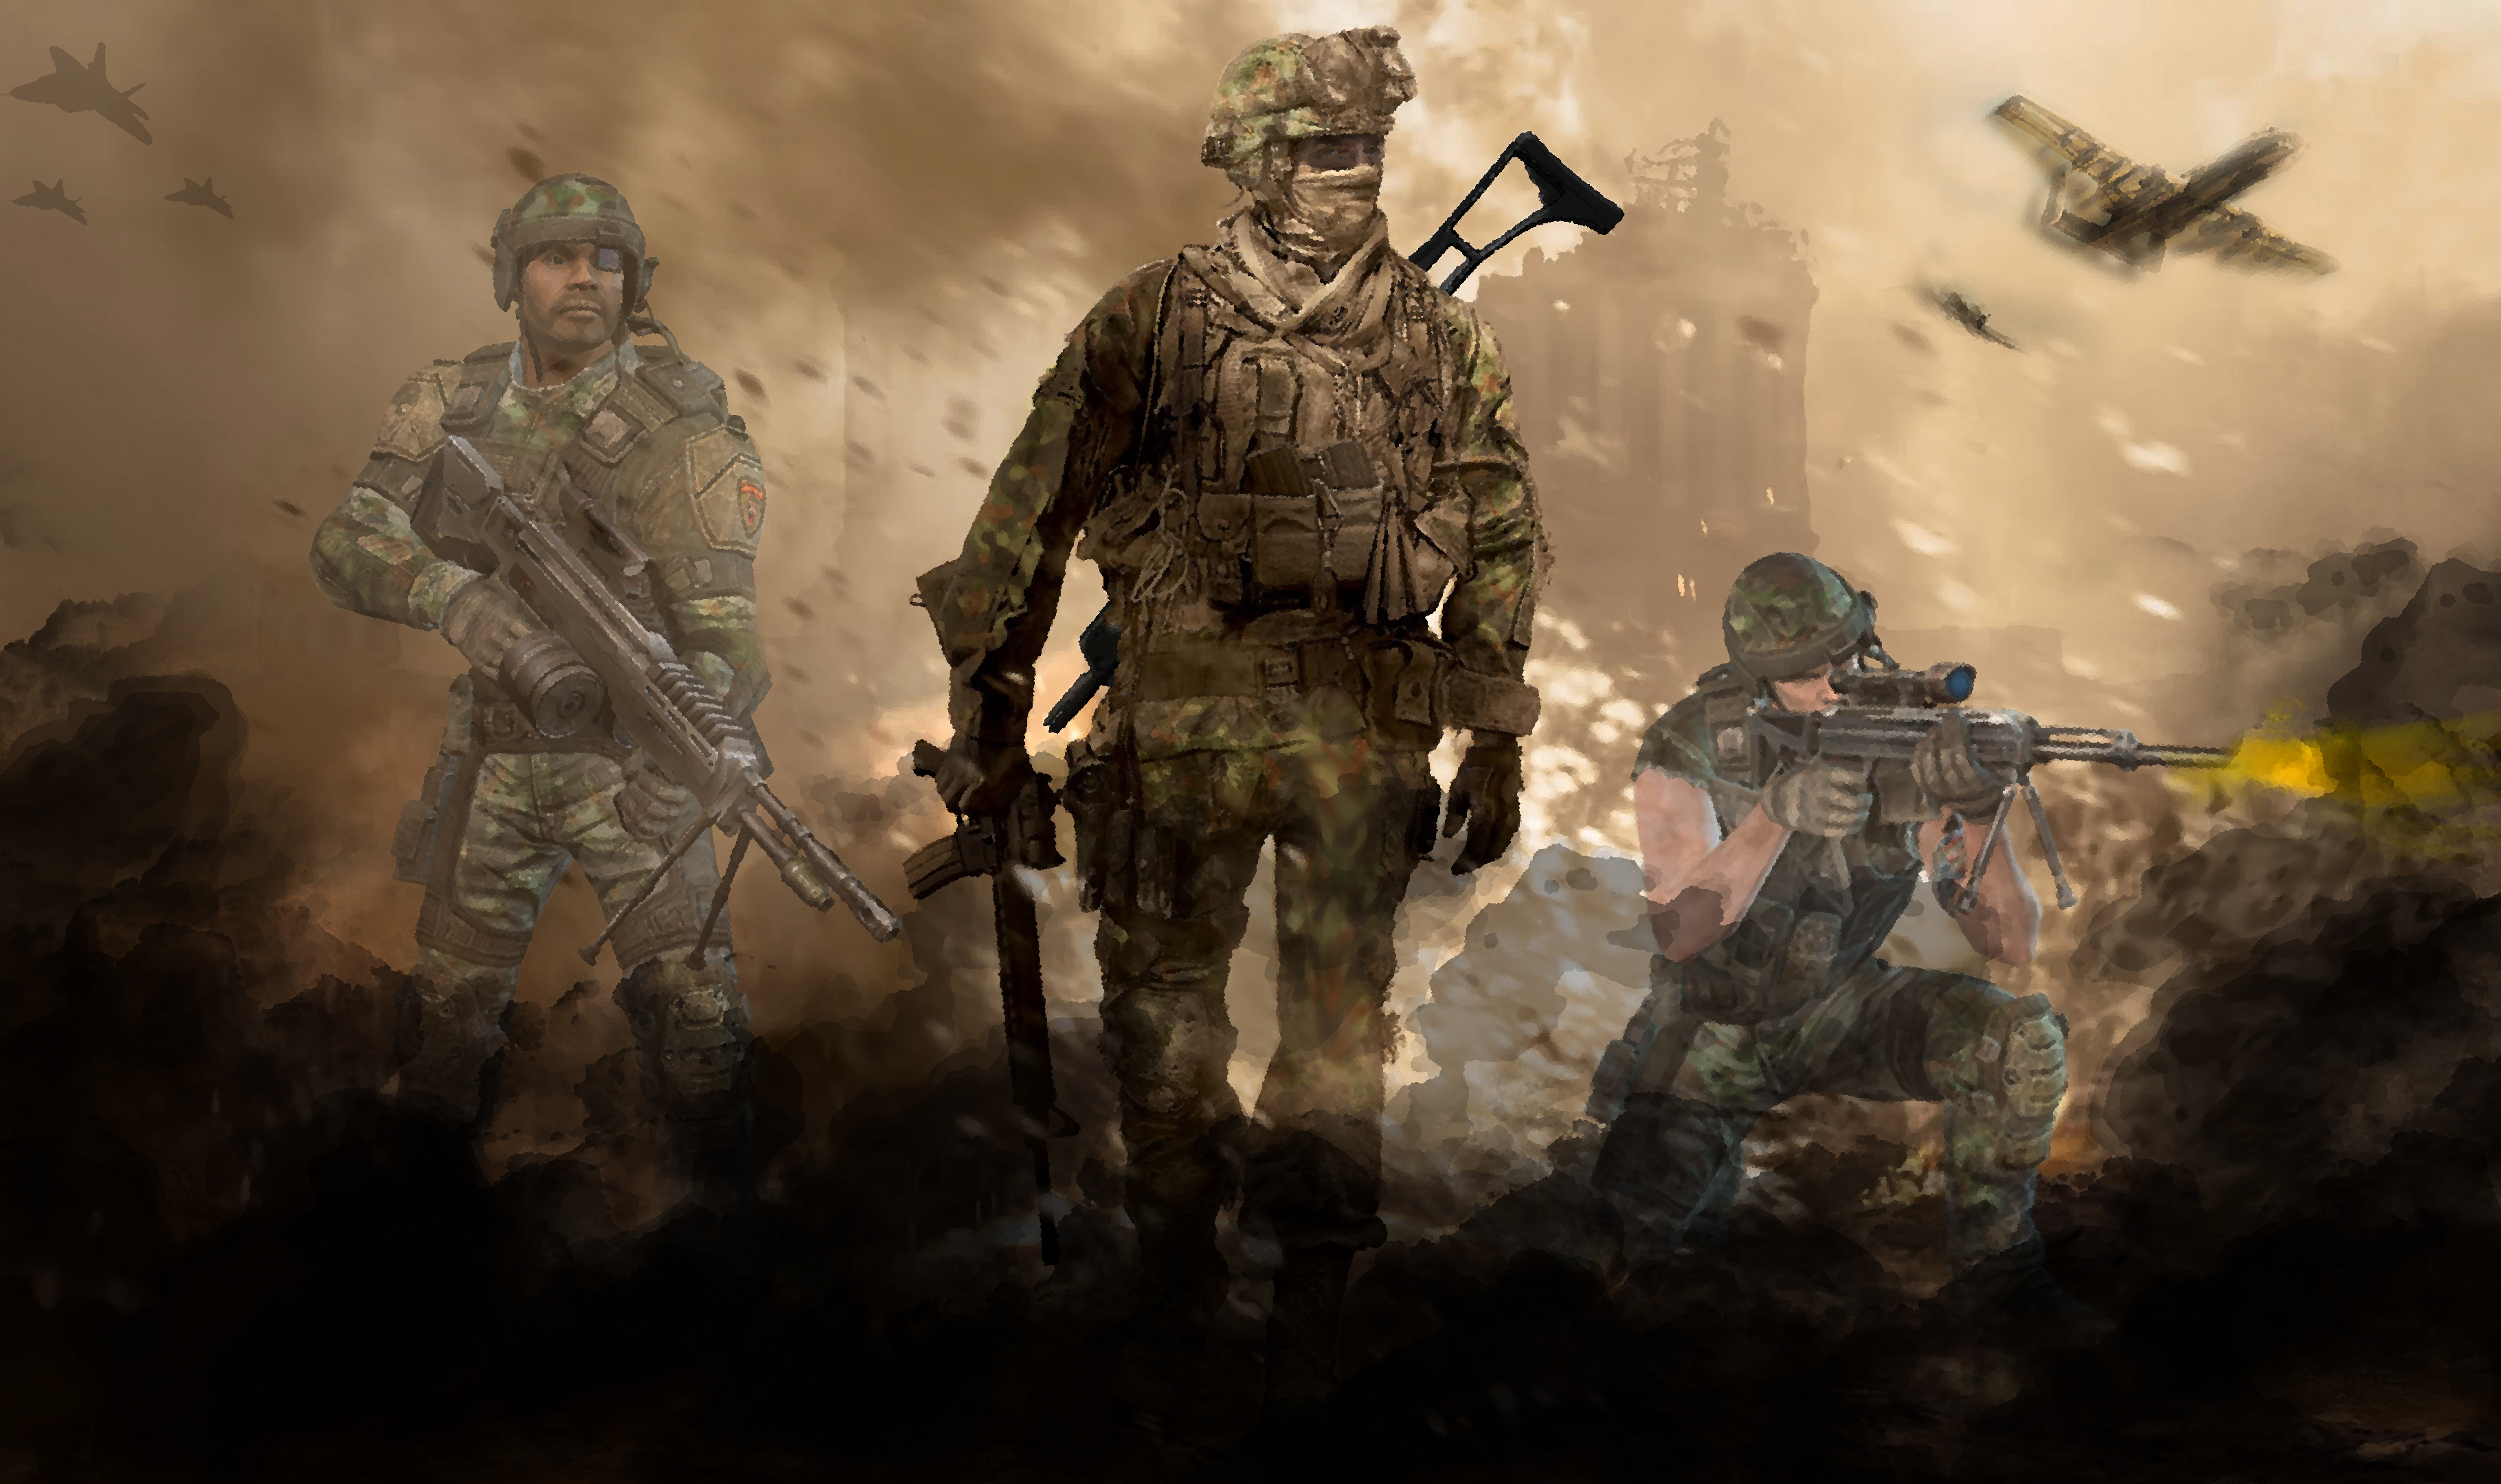 281949 Call of Duty World at War Call of Duty Modern Warfare 2 Call of  Duty 4 Modern Warfare Soldier Battle HTC U12 life wallpaper hd free  download 1080x2160  Rare Gallery HD Wallpapers